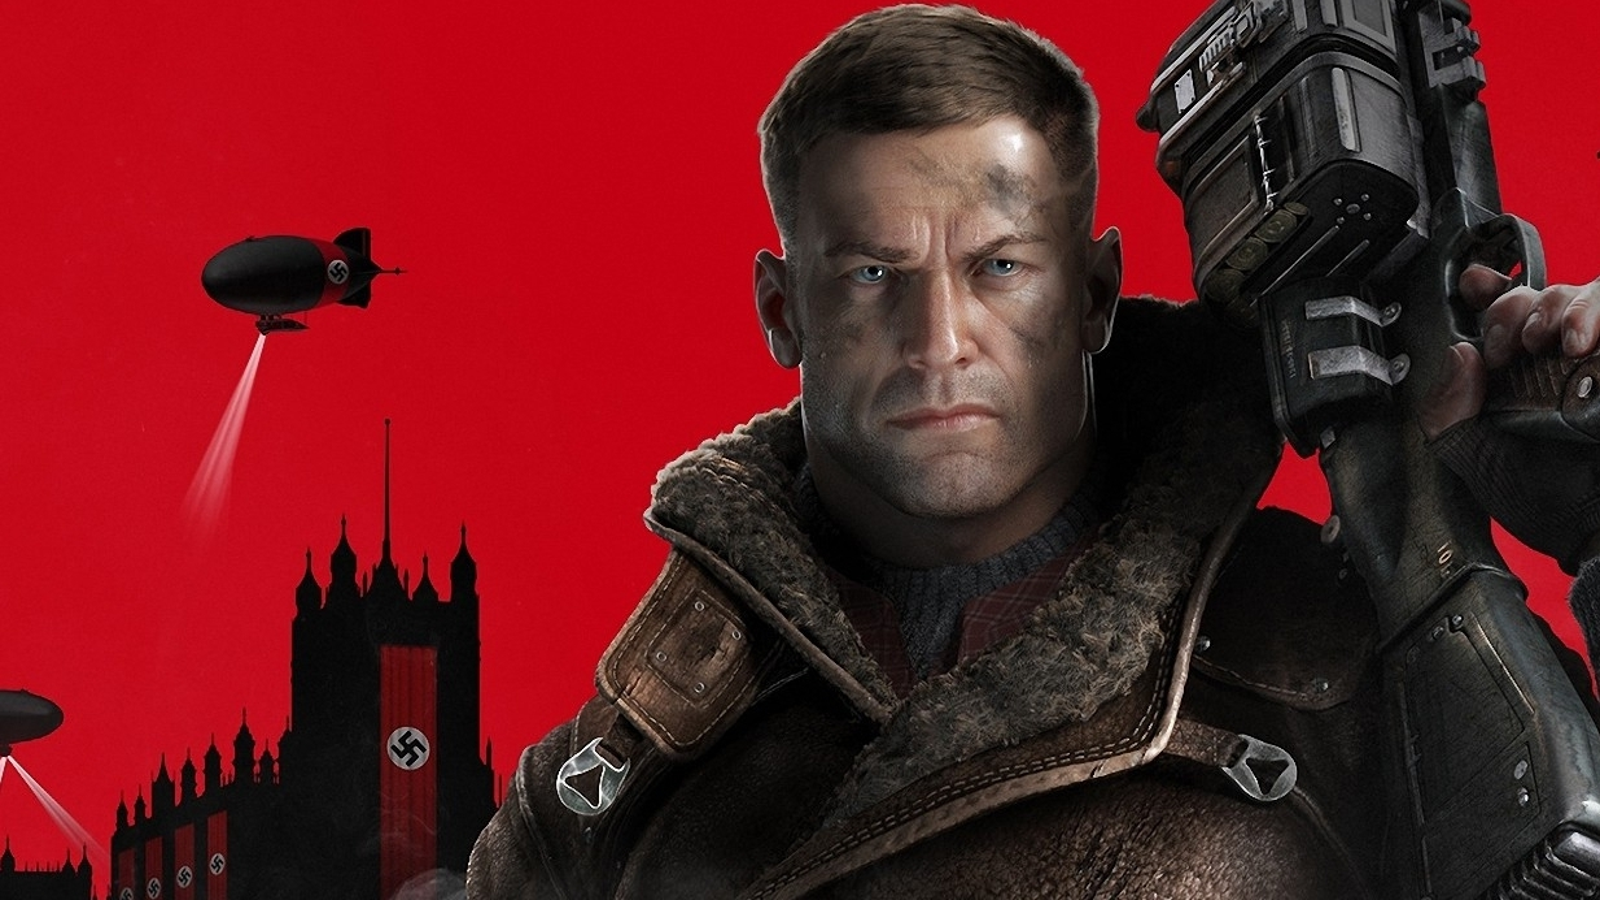 Wolfenstein II: The New Colossus - What are critics saying about the game